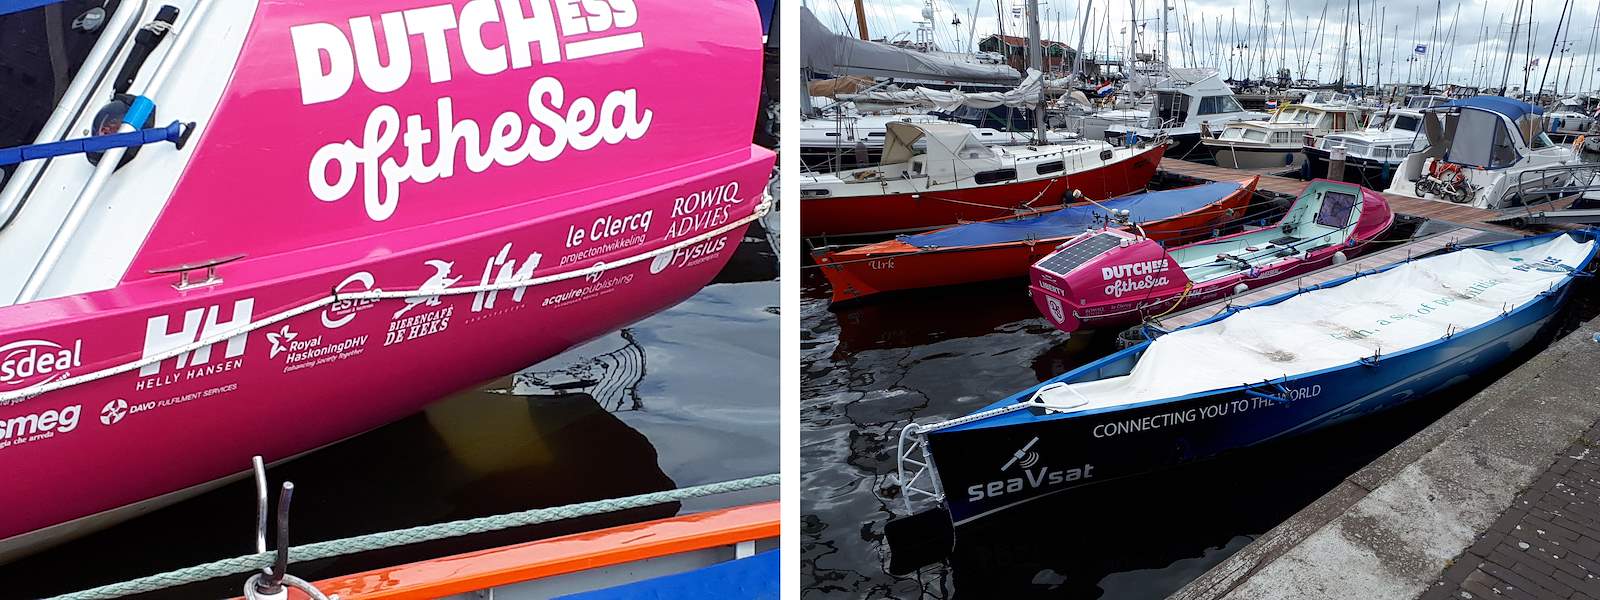 Colleague Bela rowing more than 3000 miles across the Atlantic Ocean, also raising money for ALS Netherlands and the Plastic Soup Foundation.